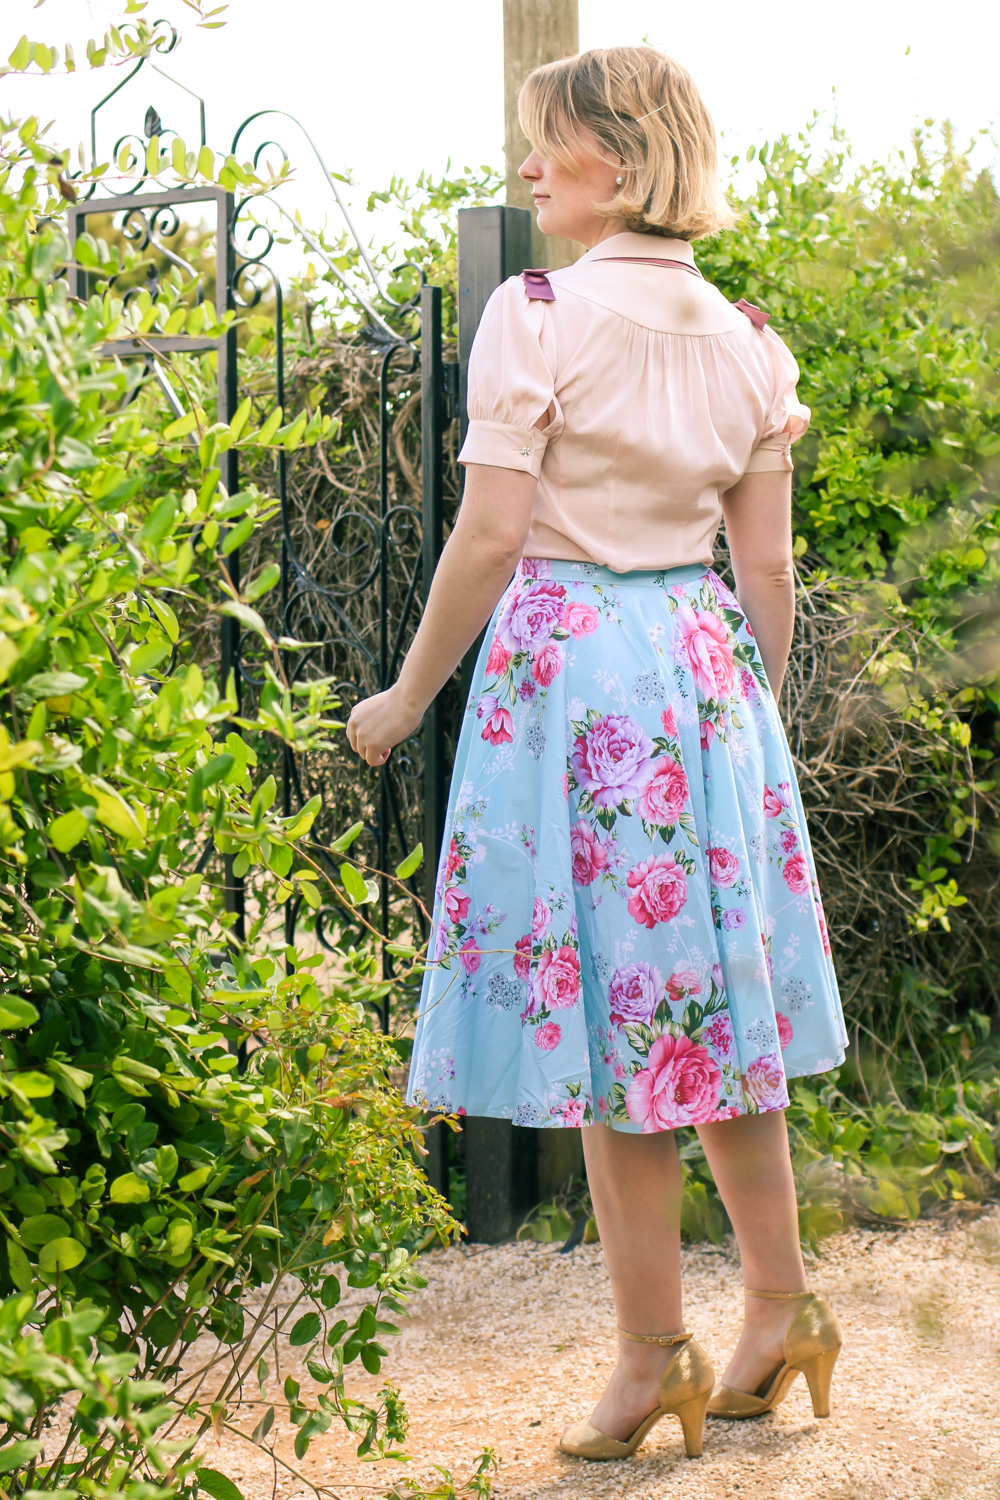 Blue Floral Midi Skirt in a Tangled Maze | Finding Femme